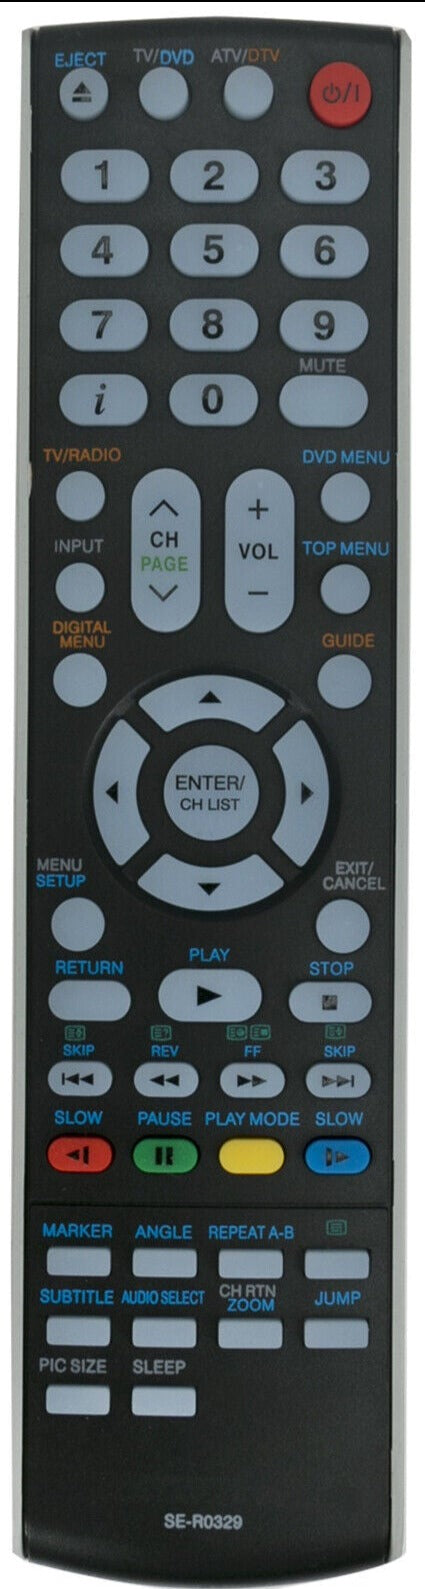 Replacement Remote Control For Toshiba TVs - Model: SE-R0329